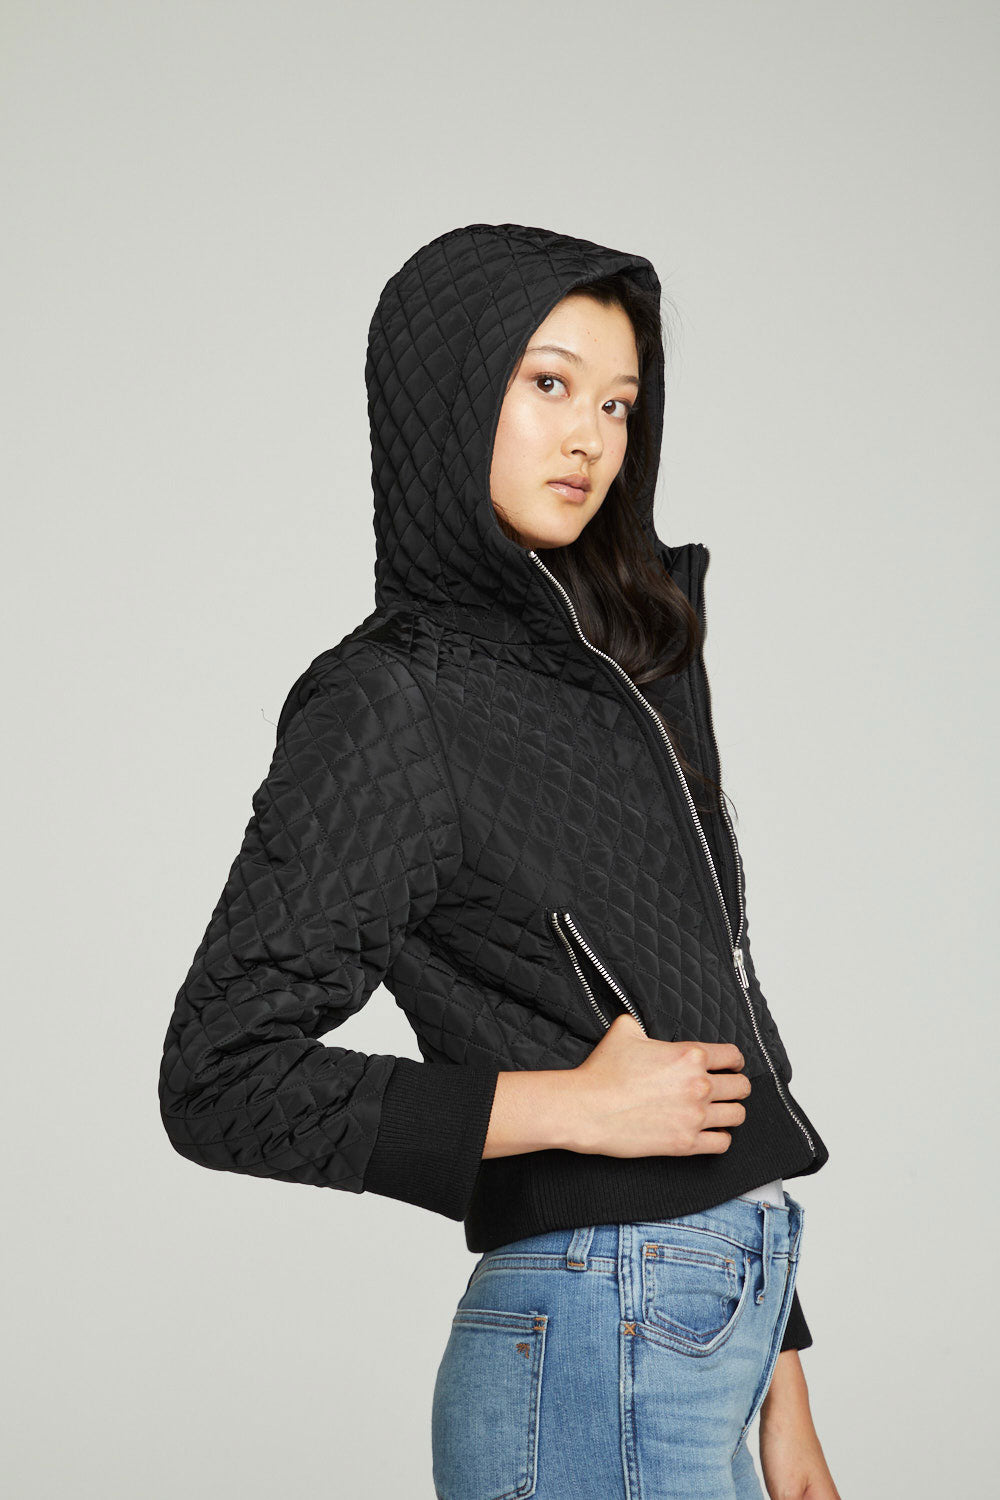 Never Have I Ever Cropped Jacket With Hood - Women's Jacket